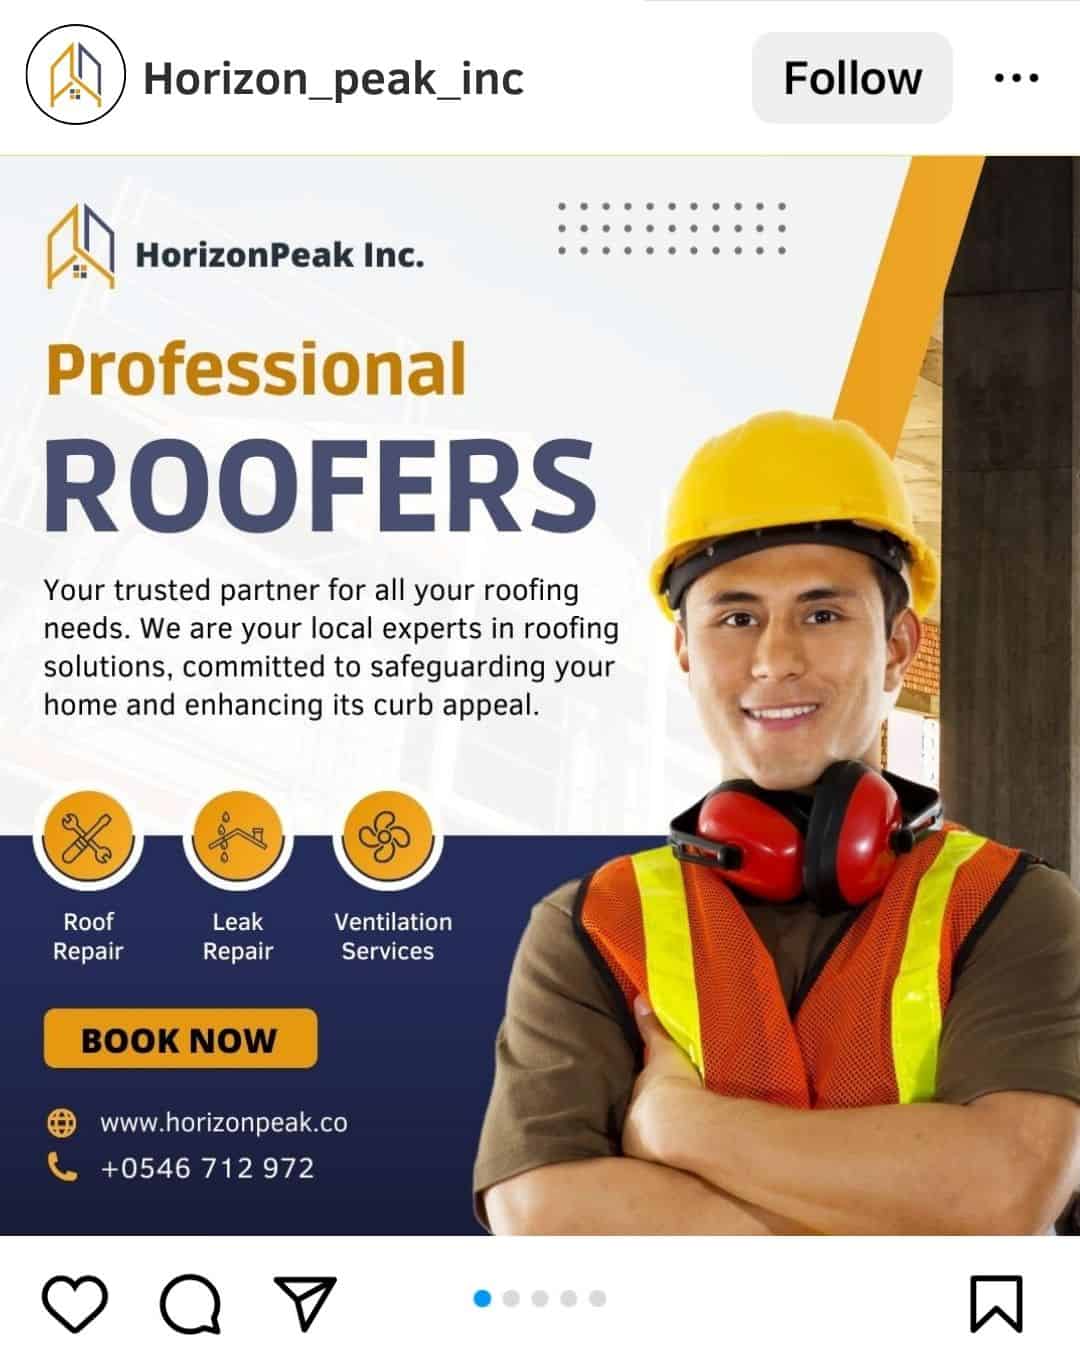 Professional Roofers Social Media Featured